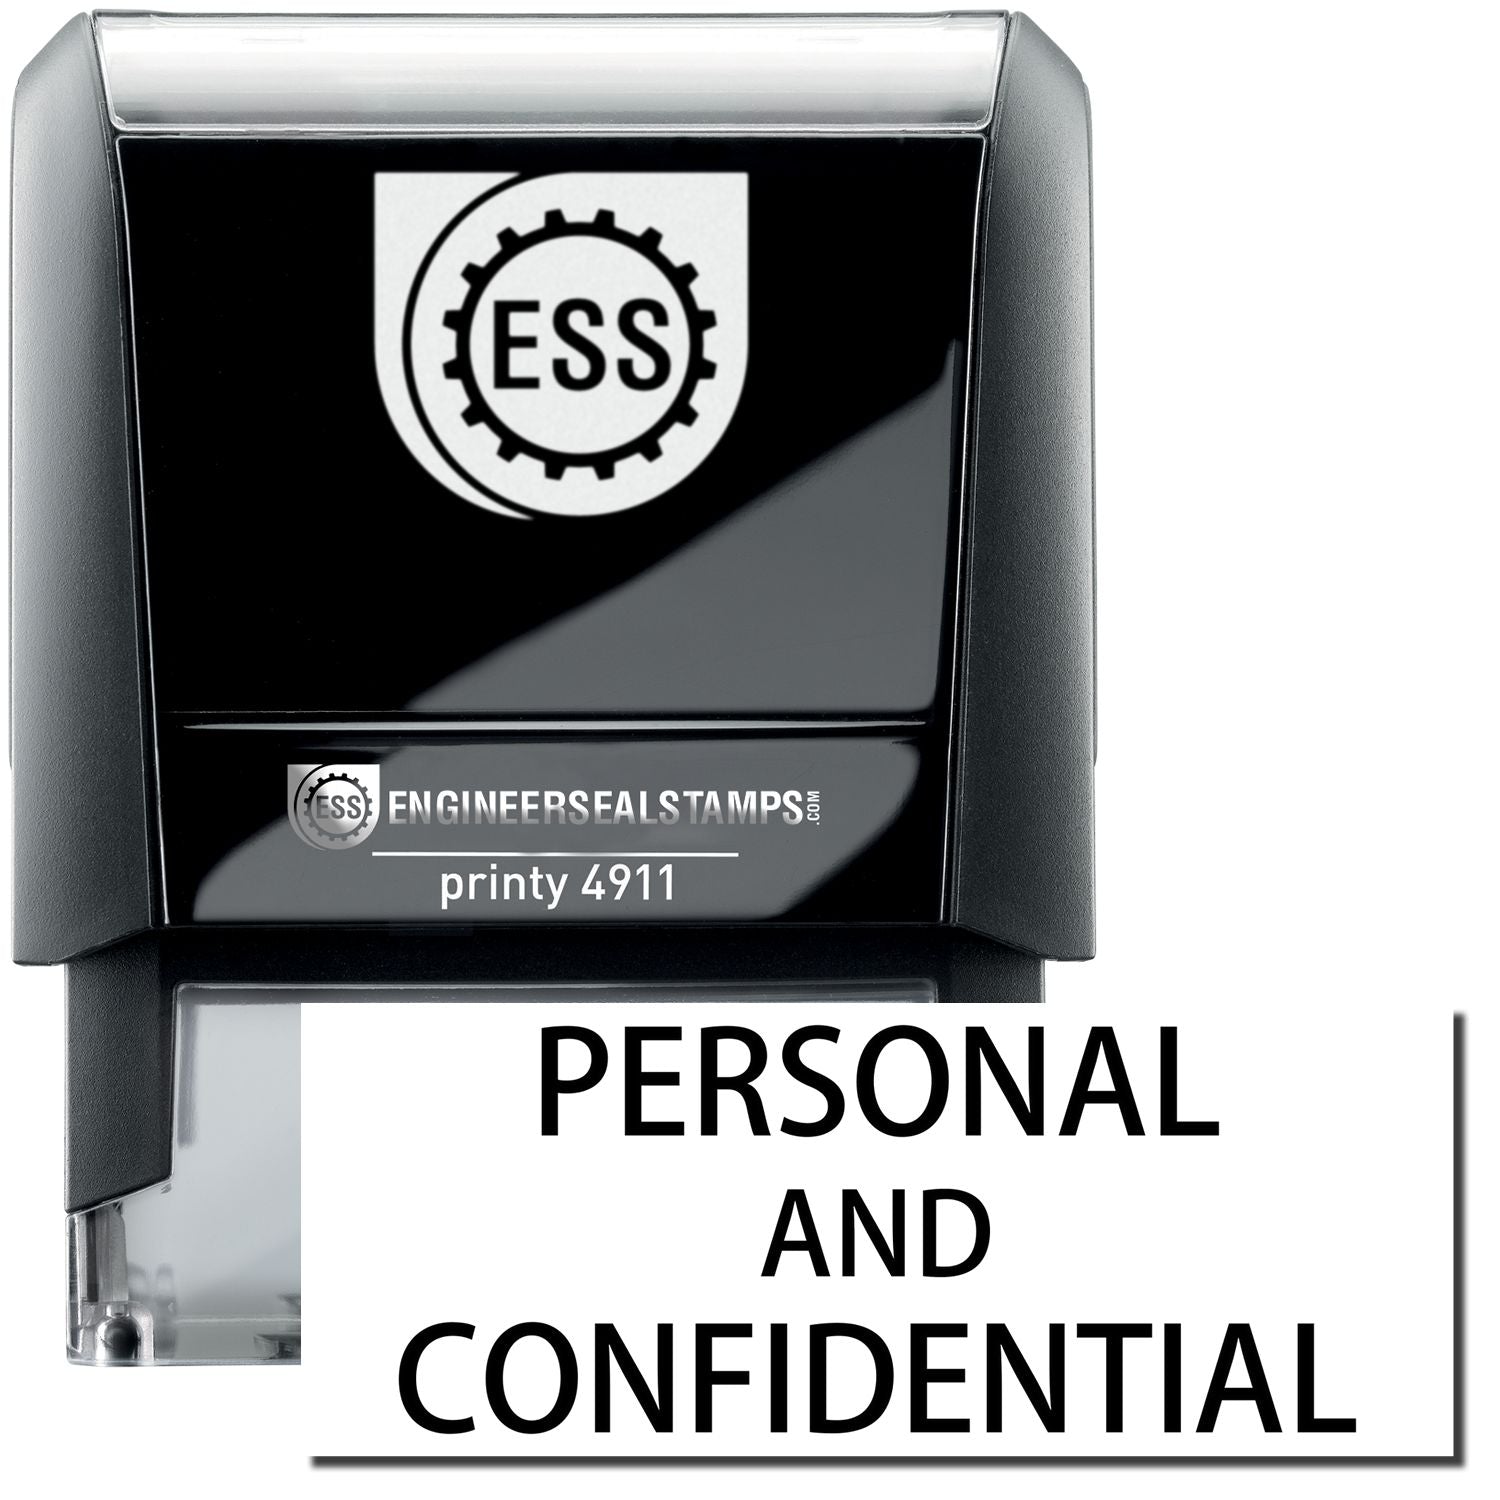 A self-inking stamp with a stamped image showing how the text "PERSONAL AND CONFIDENTIAL" is displayed after stamping.